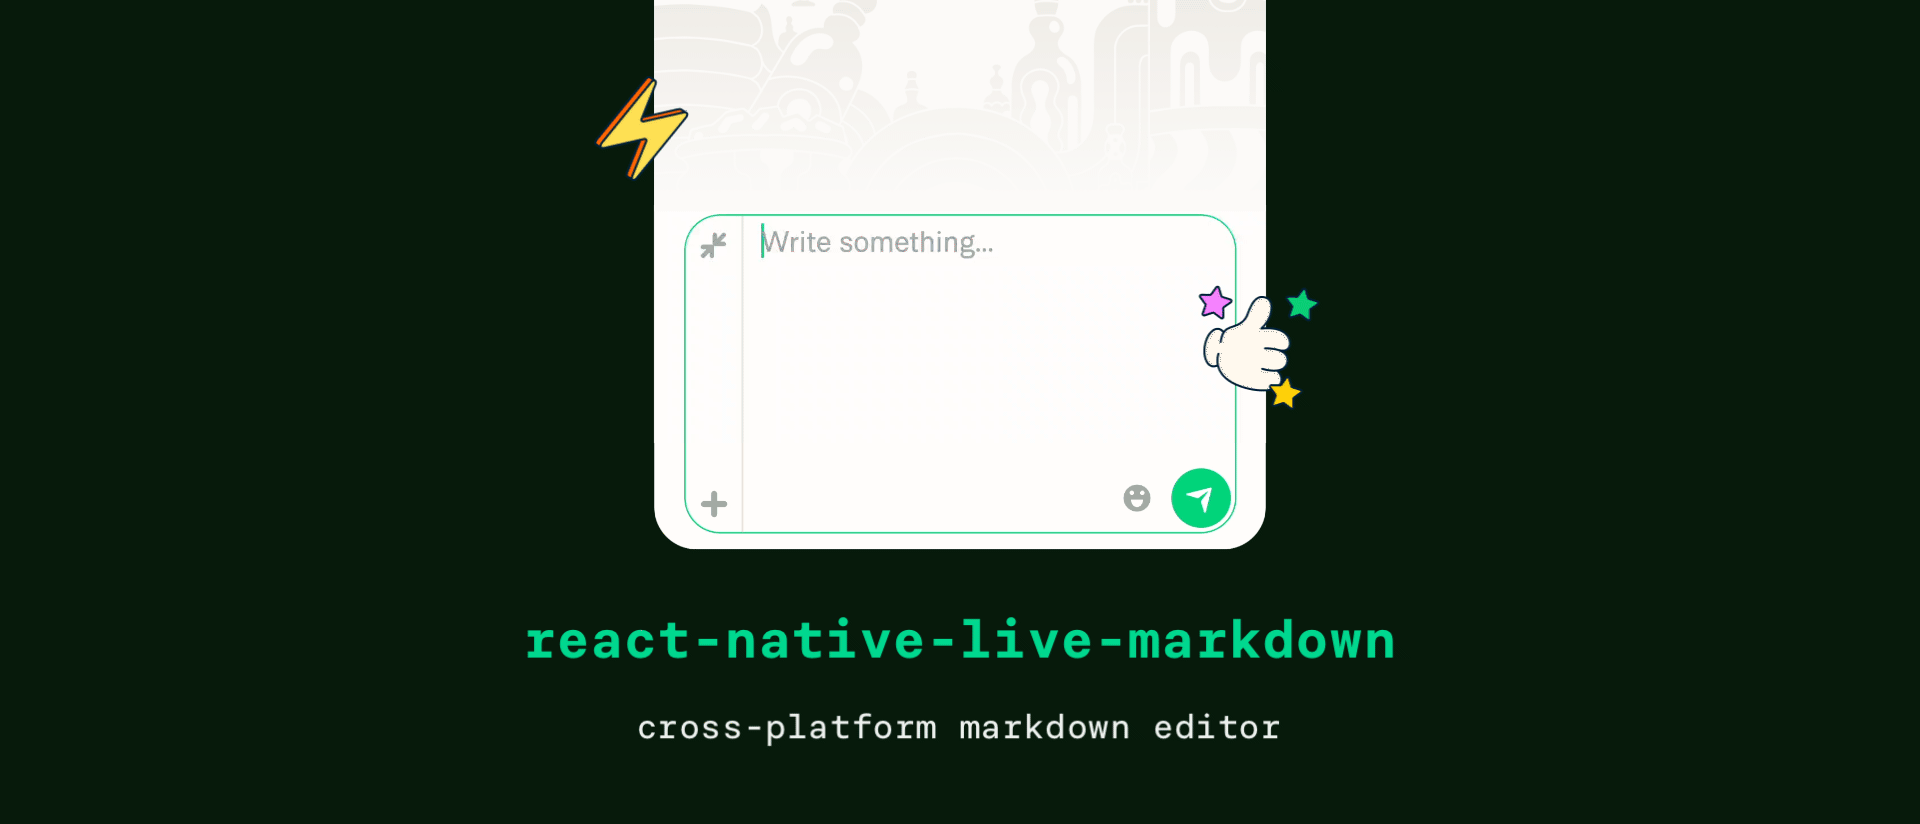 @expensify/react-native-live-markdown